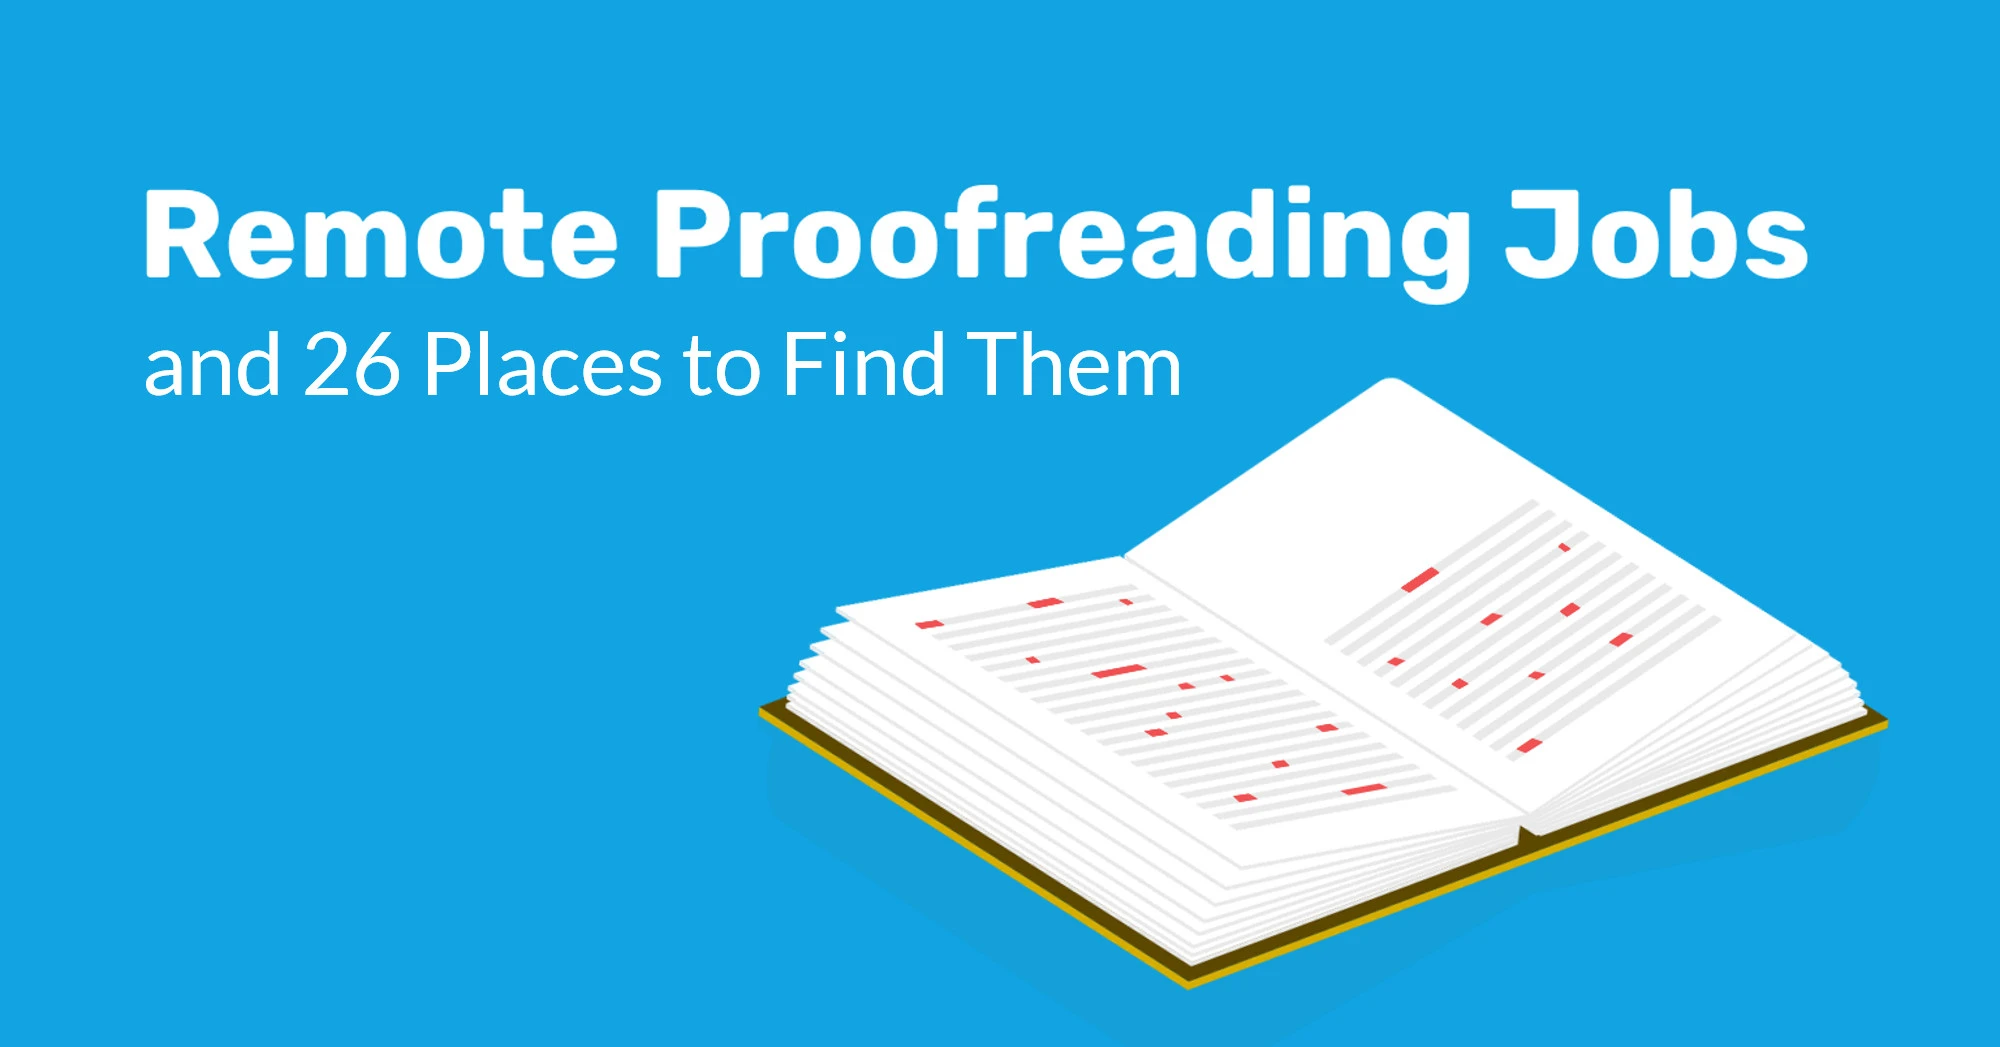 Proofreader Jobs in the USA